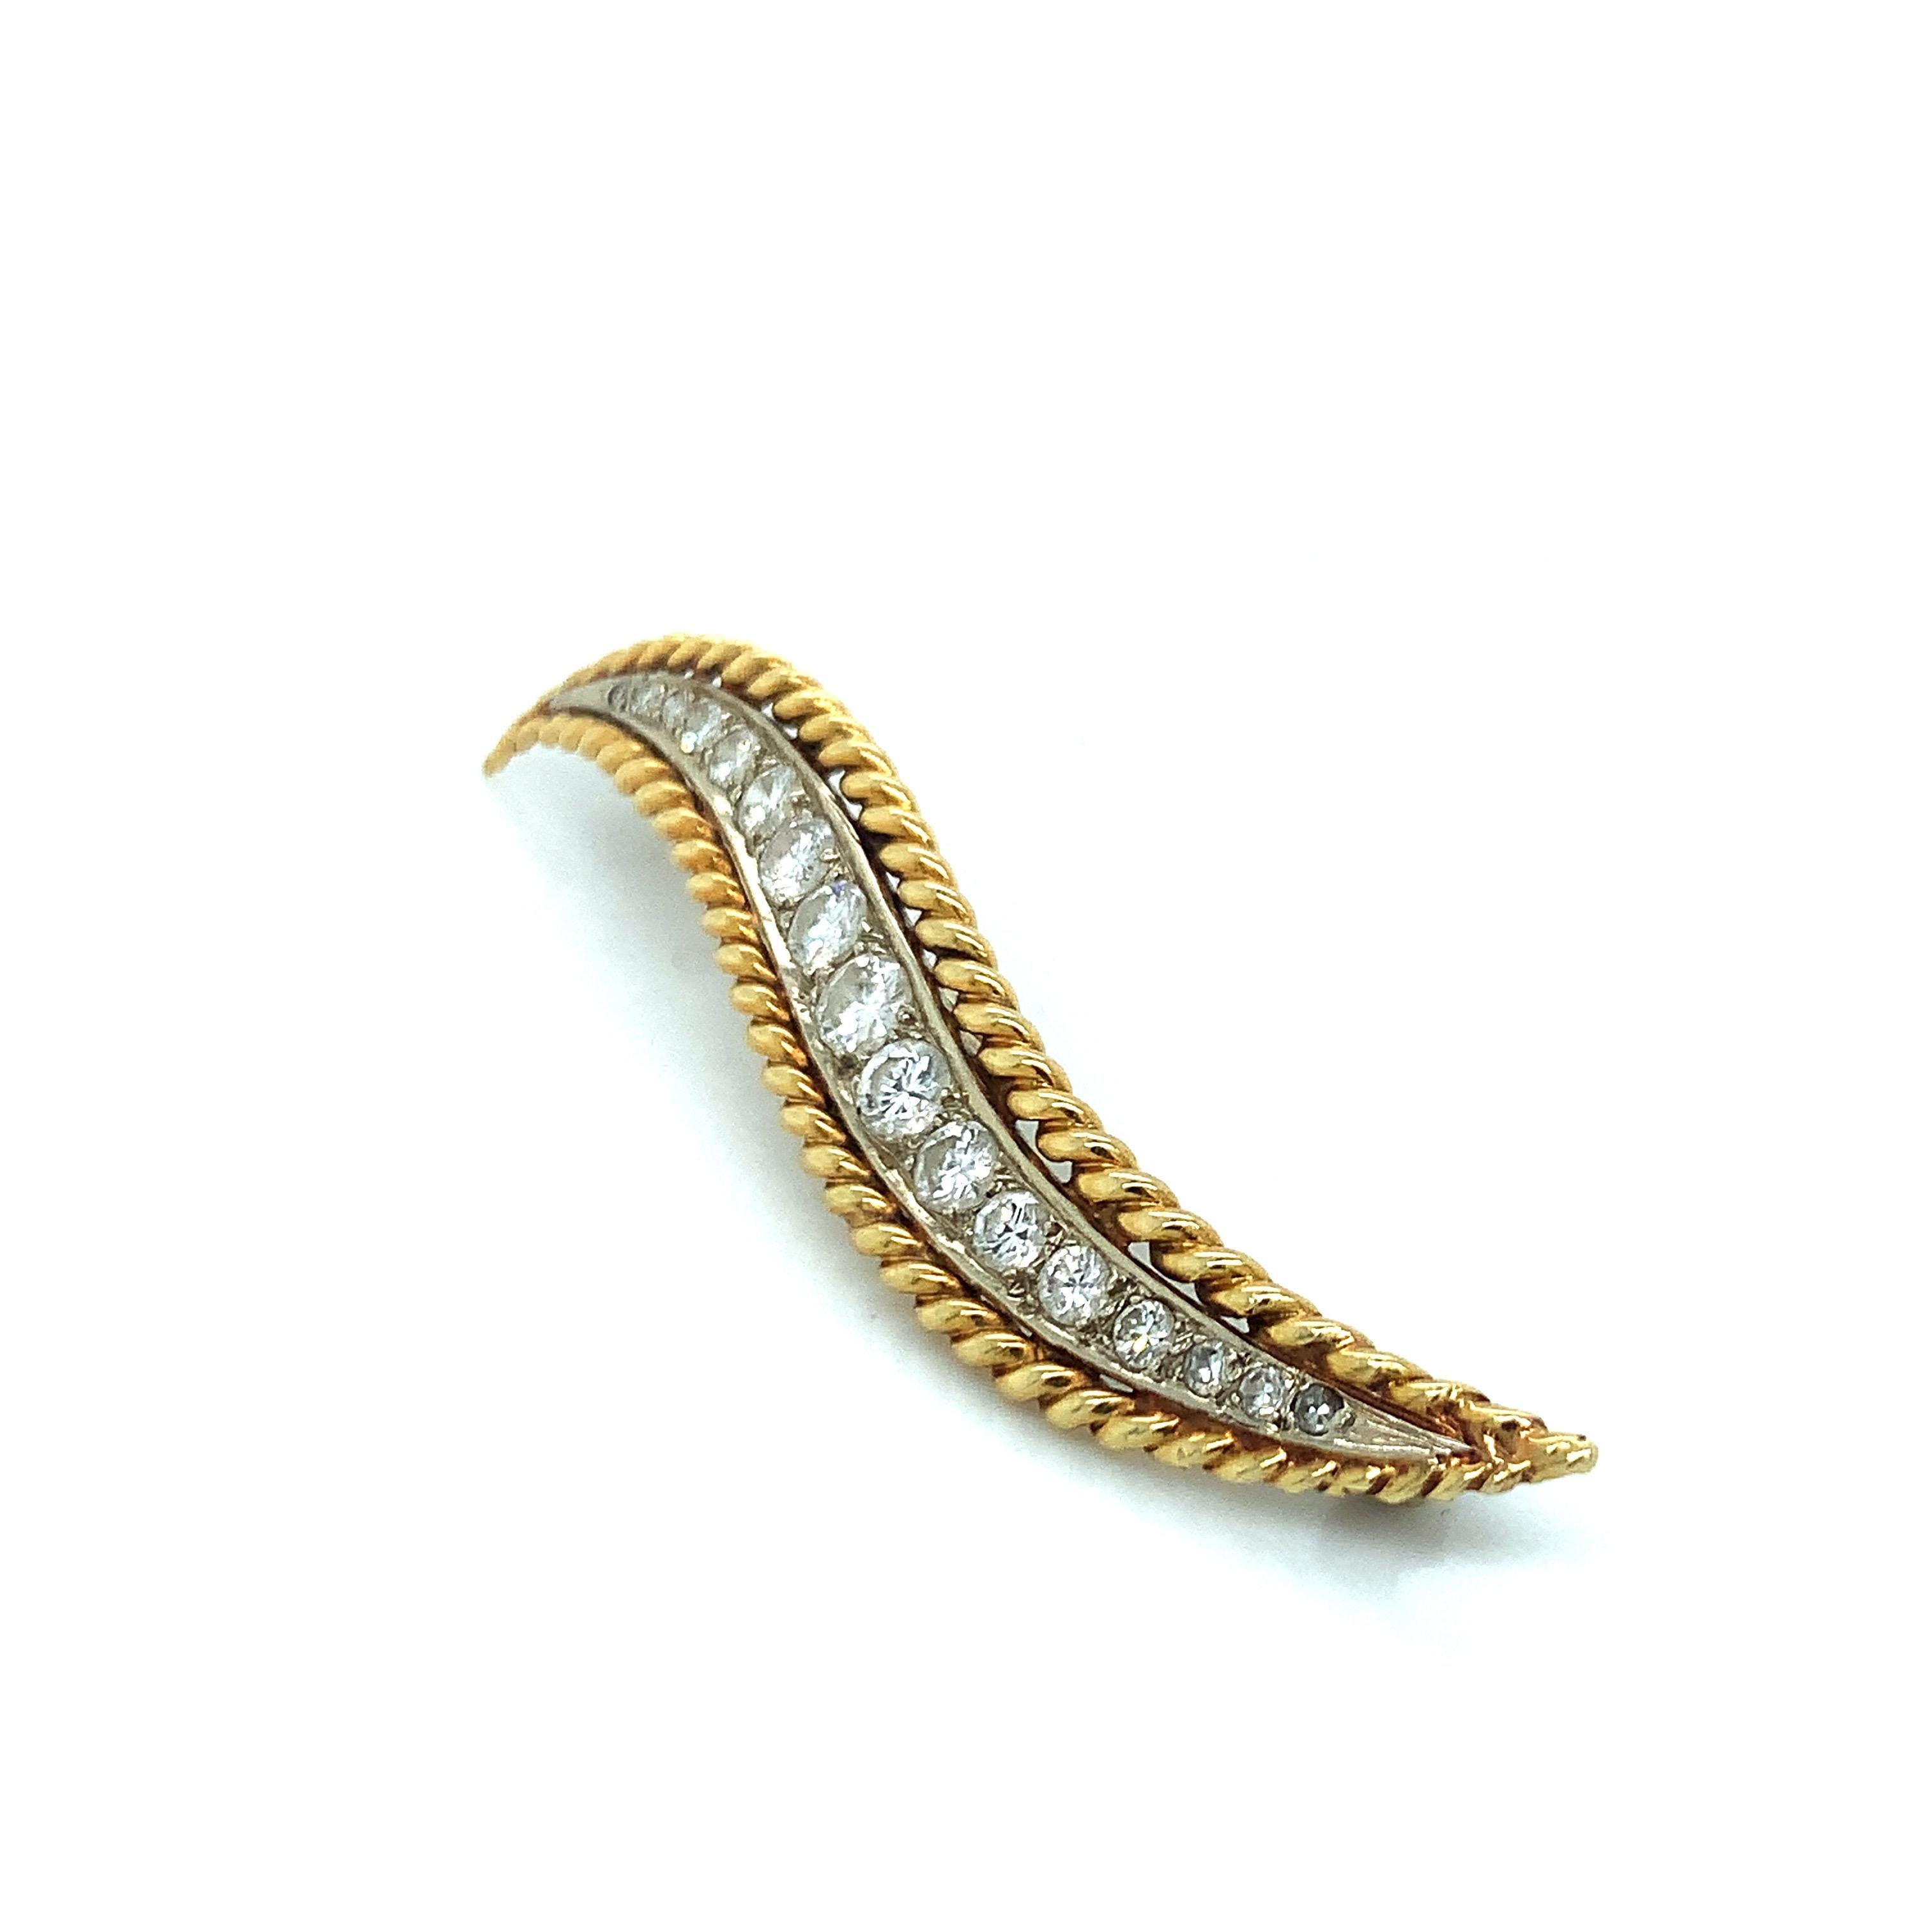 Van Cleef & Arpels S-Shaped Diamond Gold Brooch In Excellent Condition For Sale In New York, NY